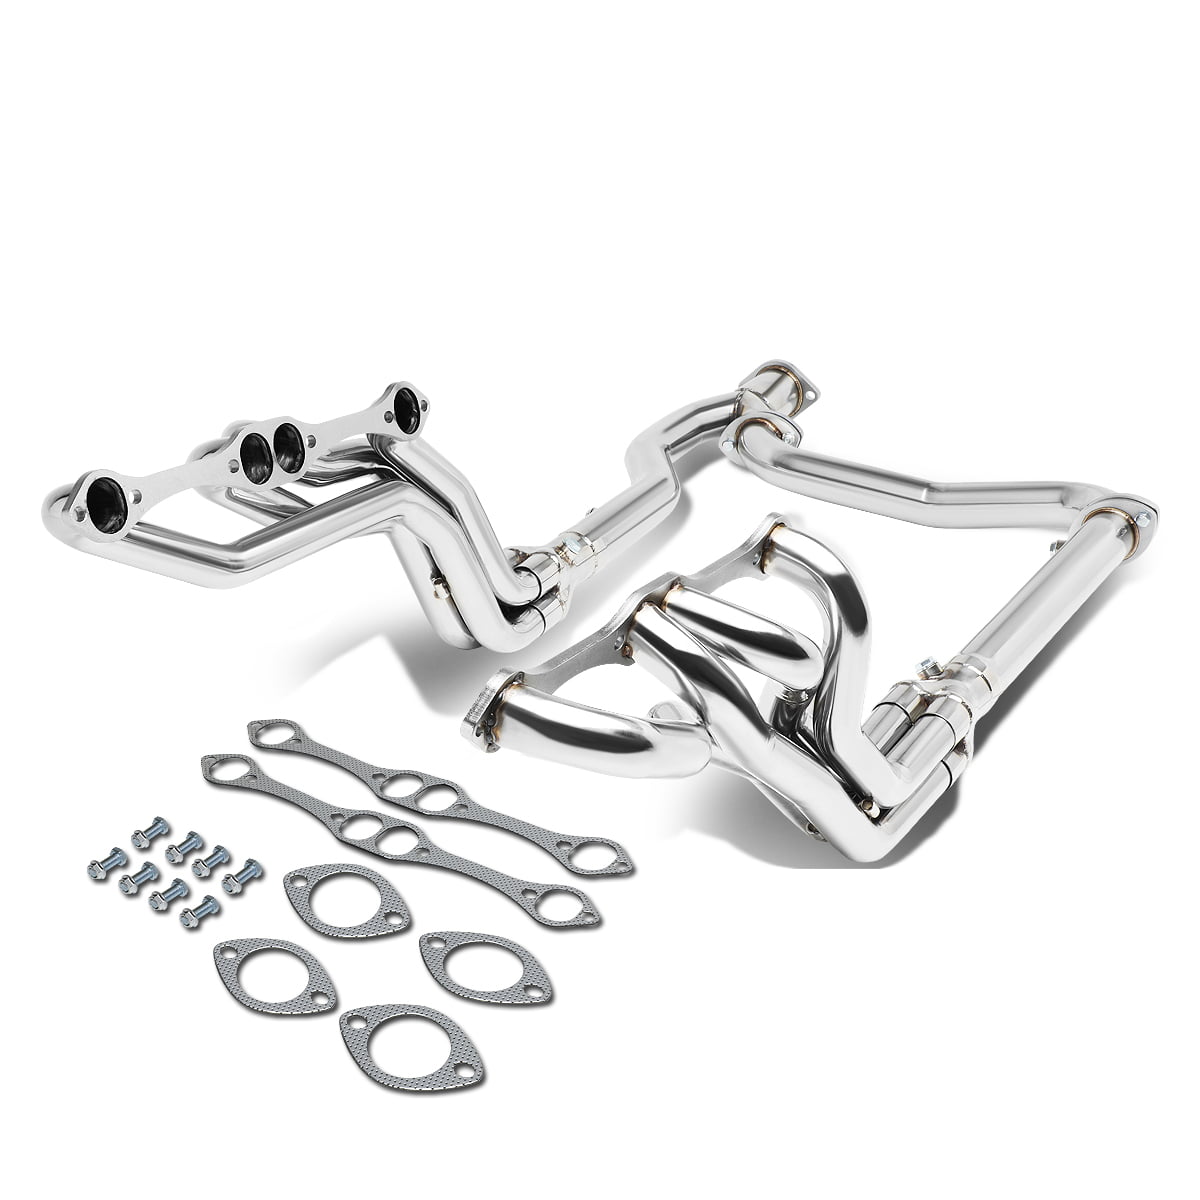 For 92-00 GMC/Chevy C/K Series GMT400 High Performance 4-2-1 Design Stainless Steel Exhaust Header with Y-Pipe 